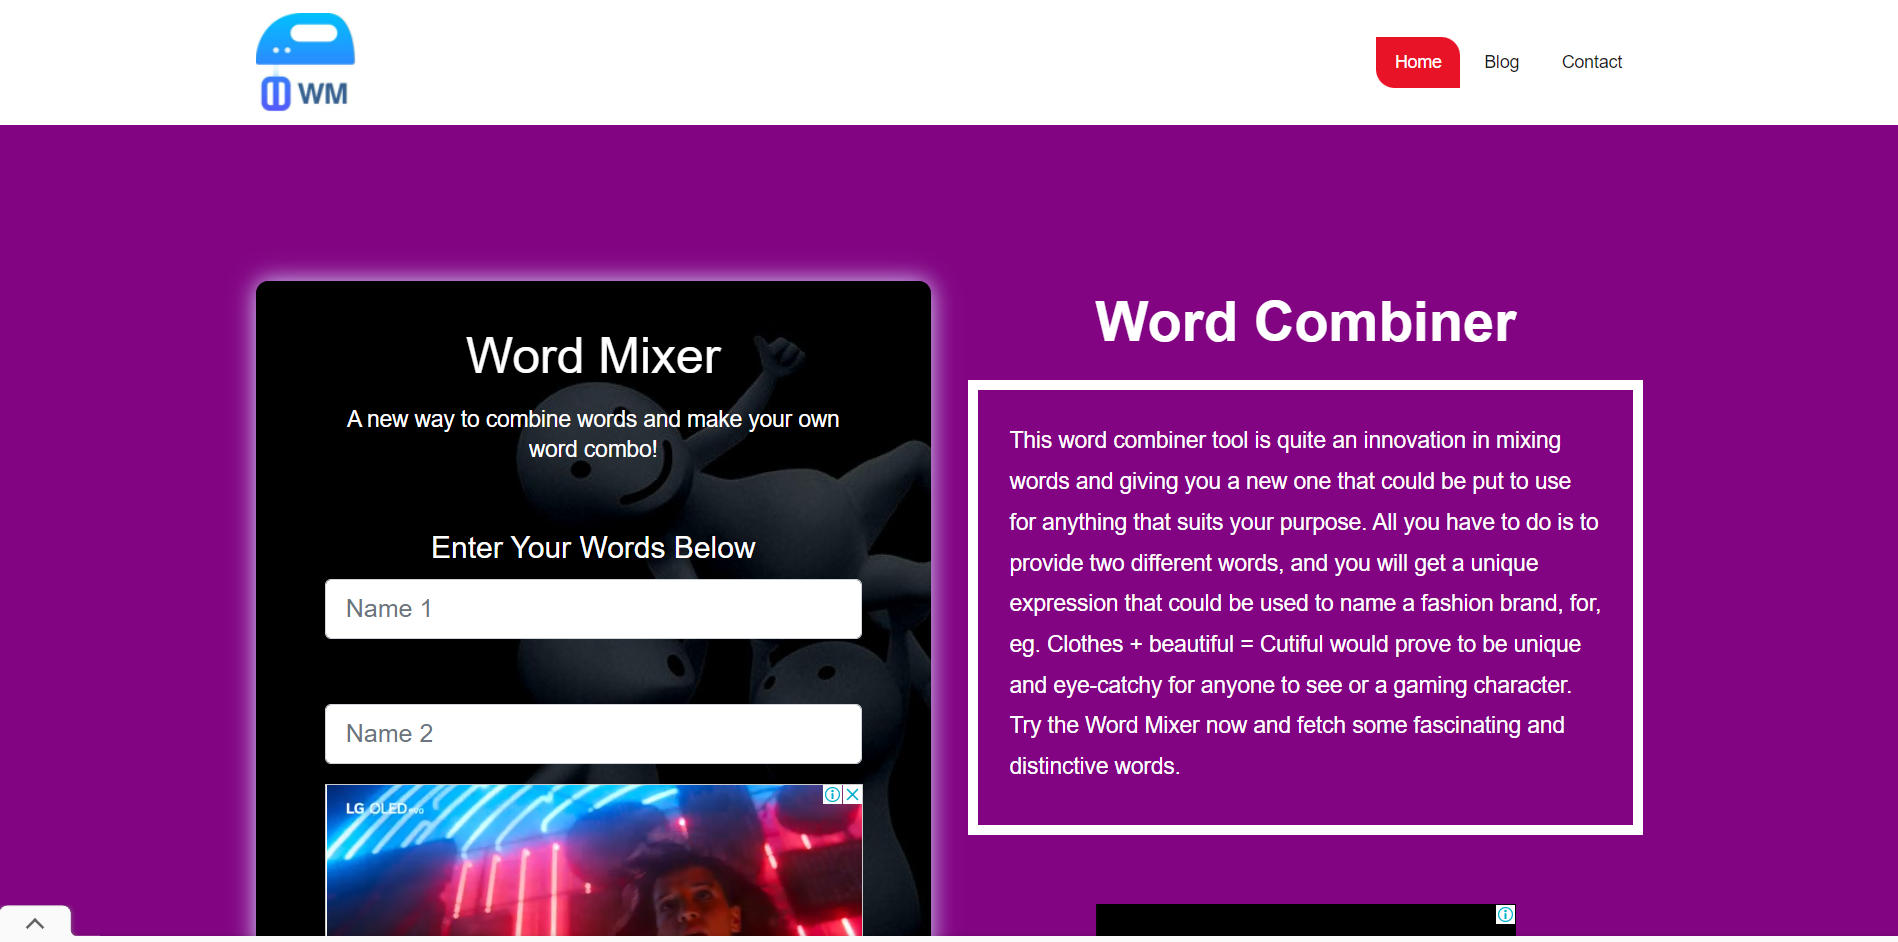 The Word Mixer